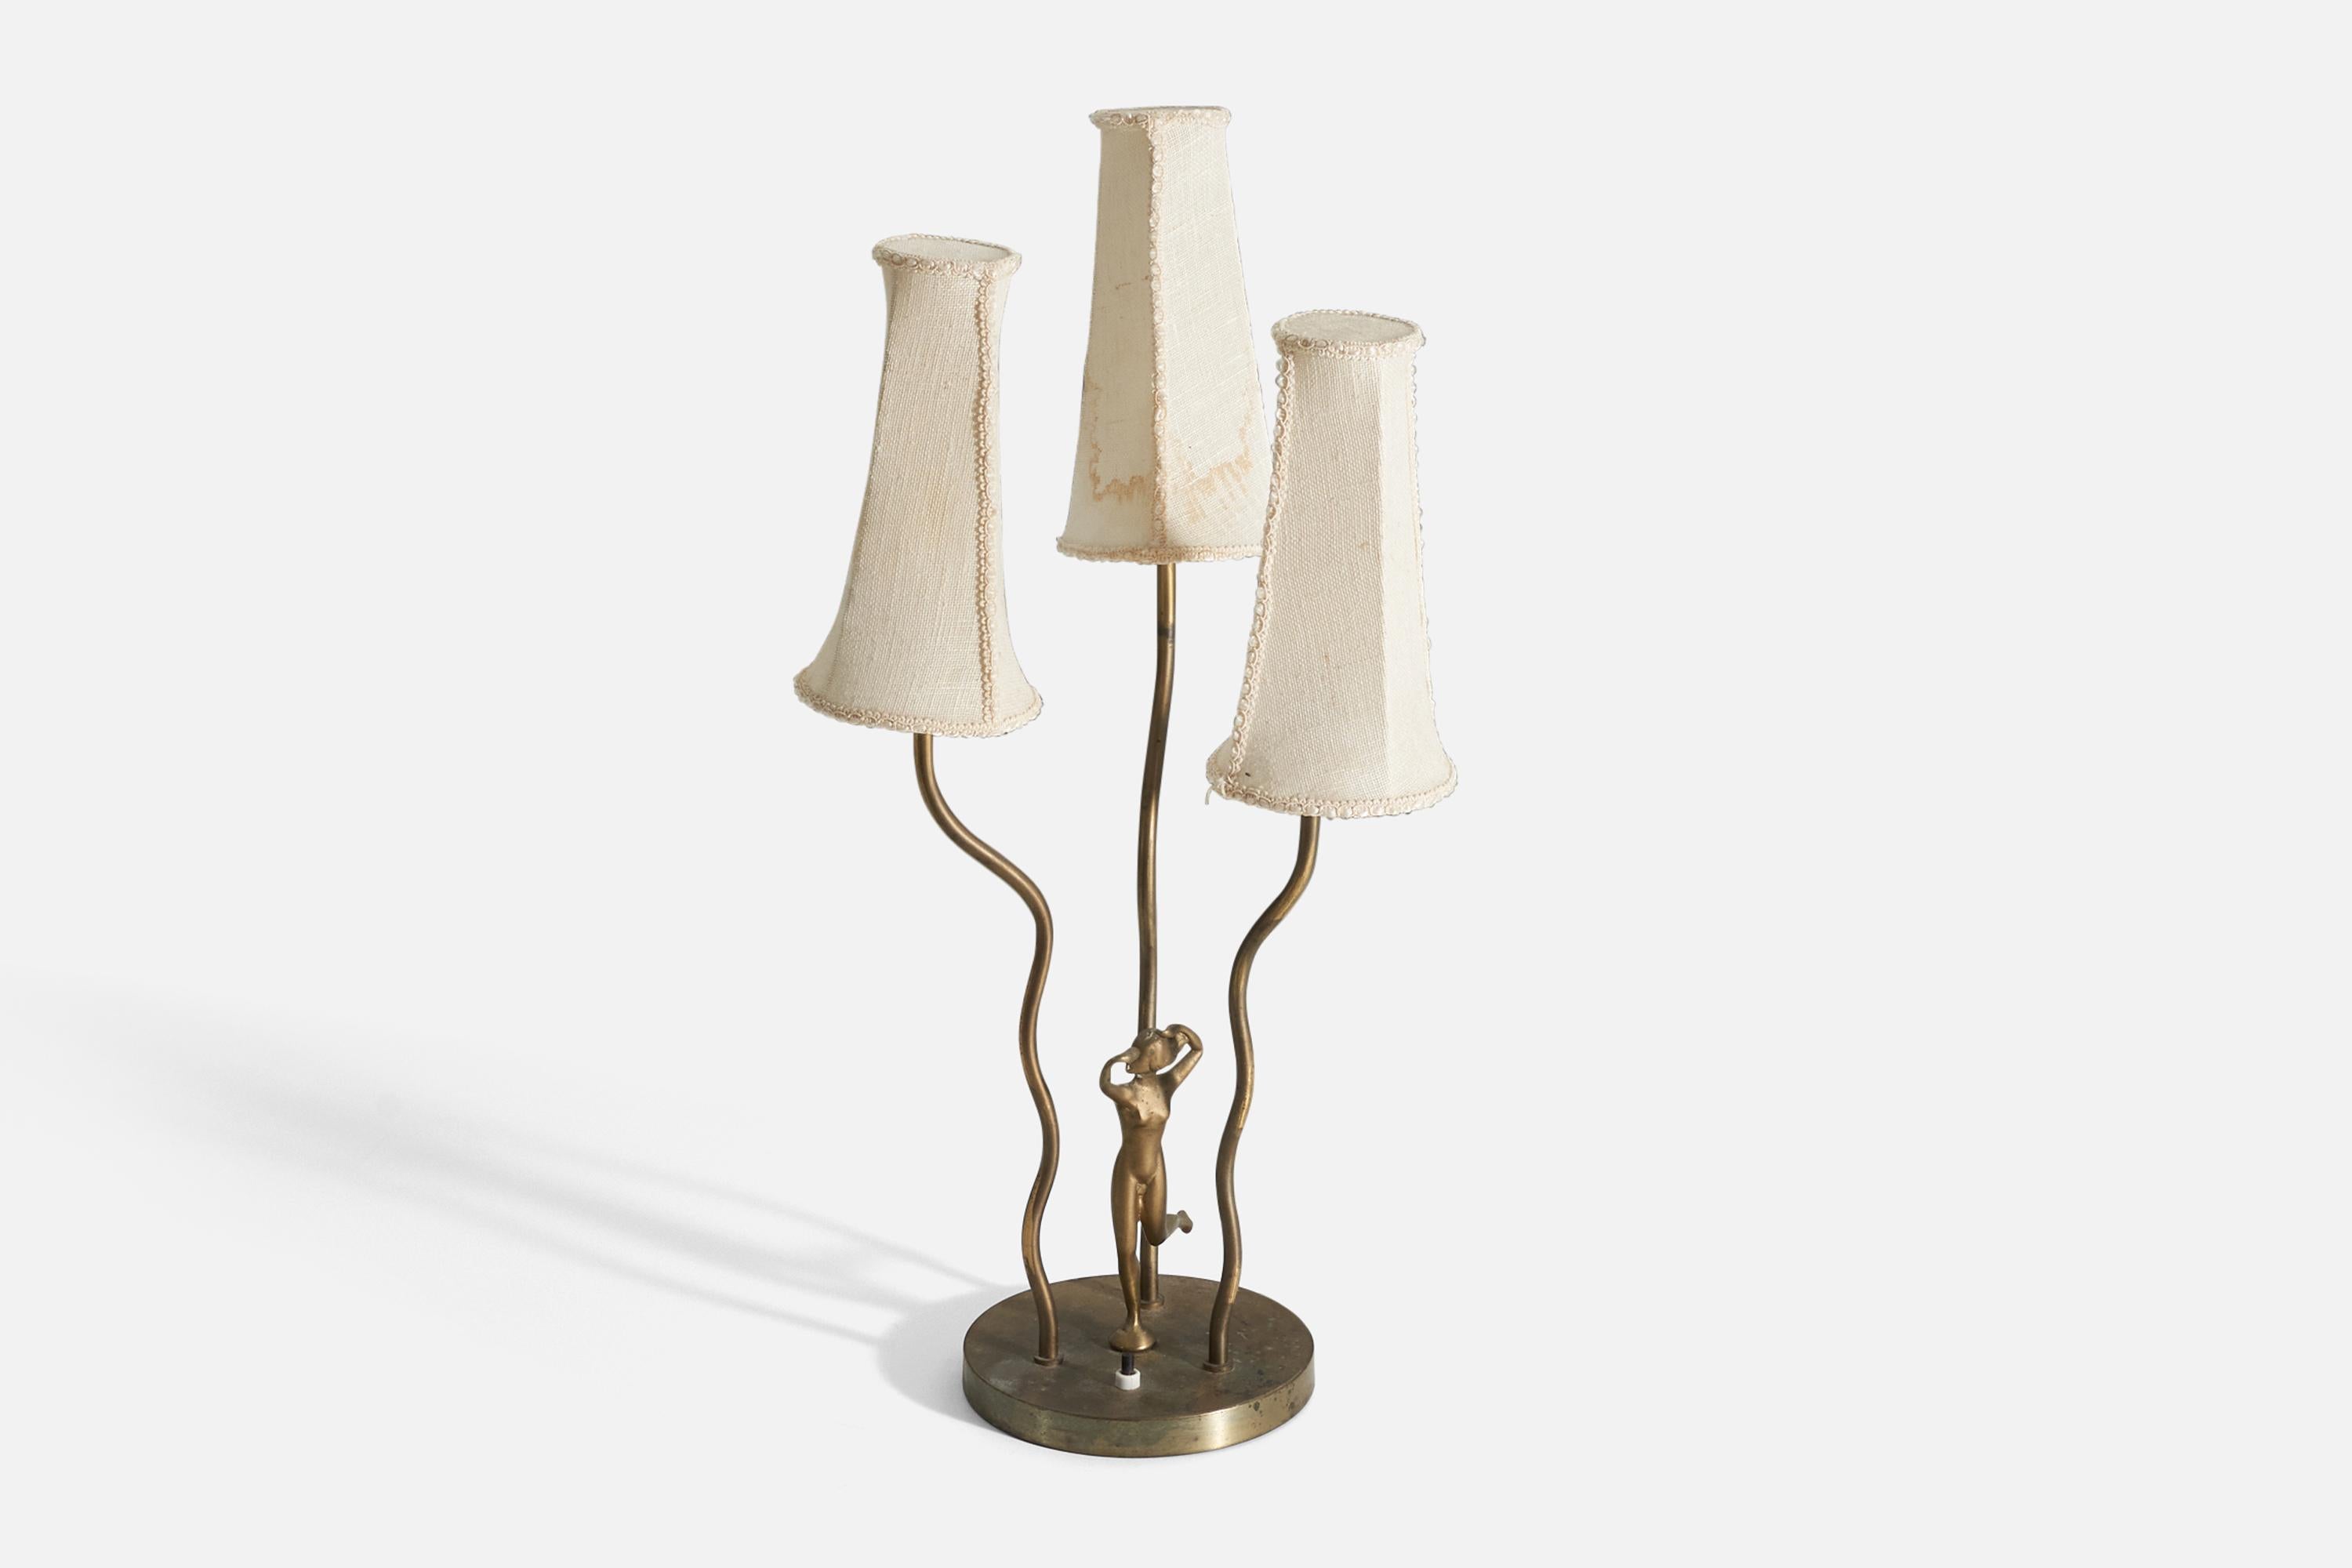 A table lamp, designed and produced in Sweden, 1940s. Features three organic arms. Ornamental sculpture attached to base. Vintage lampshades 

Other designers of the period include Paavo Tynell, Alvar Aalto, Josef Frank, and Lisa Johansson-Pape.